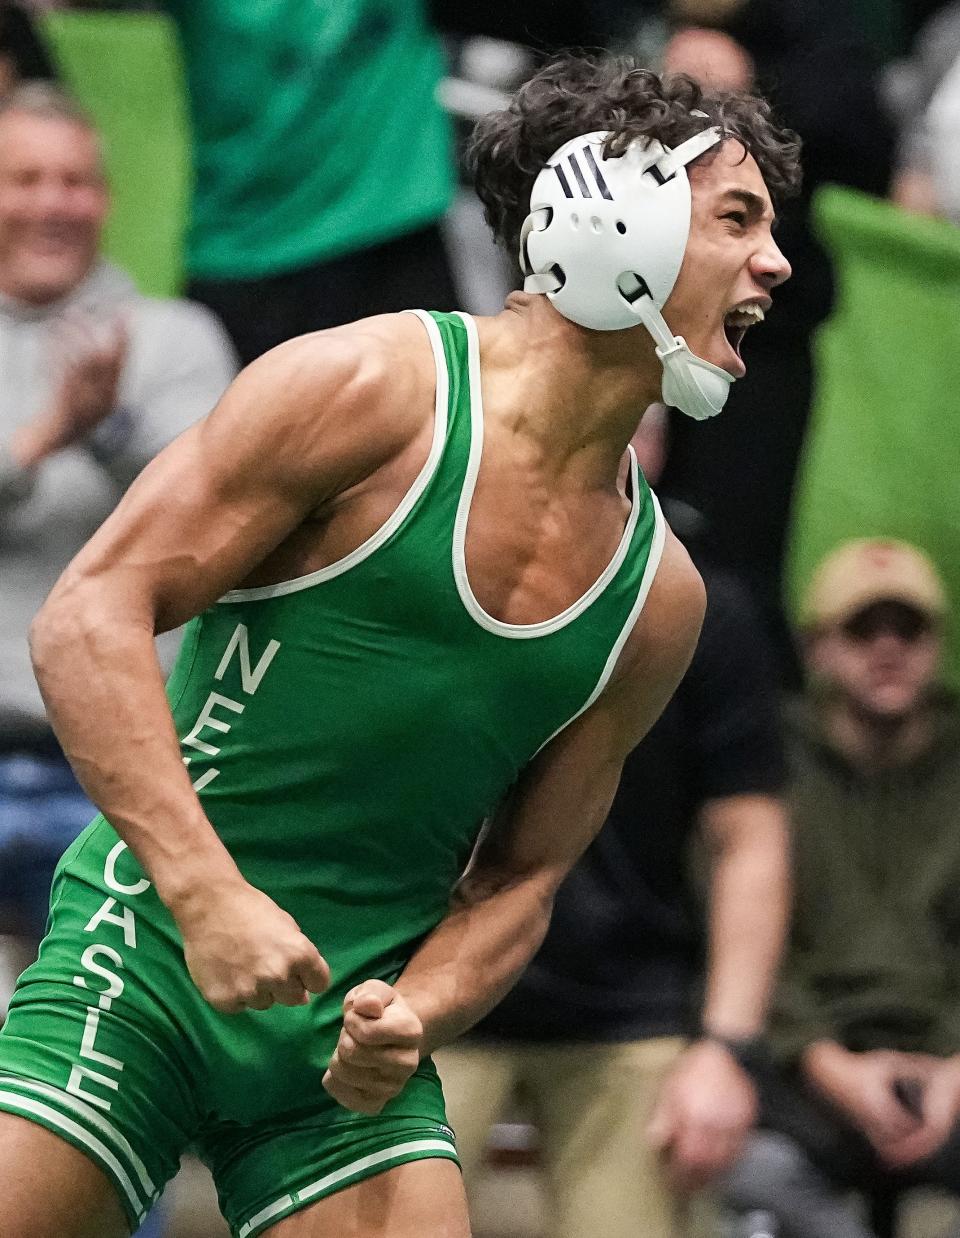 New Castle Tylin Thrine yells in excitement after defeating Cathedral Jesus Aquino-Morales during the IHSAA wrestling semi-state on Saturday, Feb. 11, 2023 at New Castle Fieldhouse in New Castle.